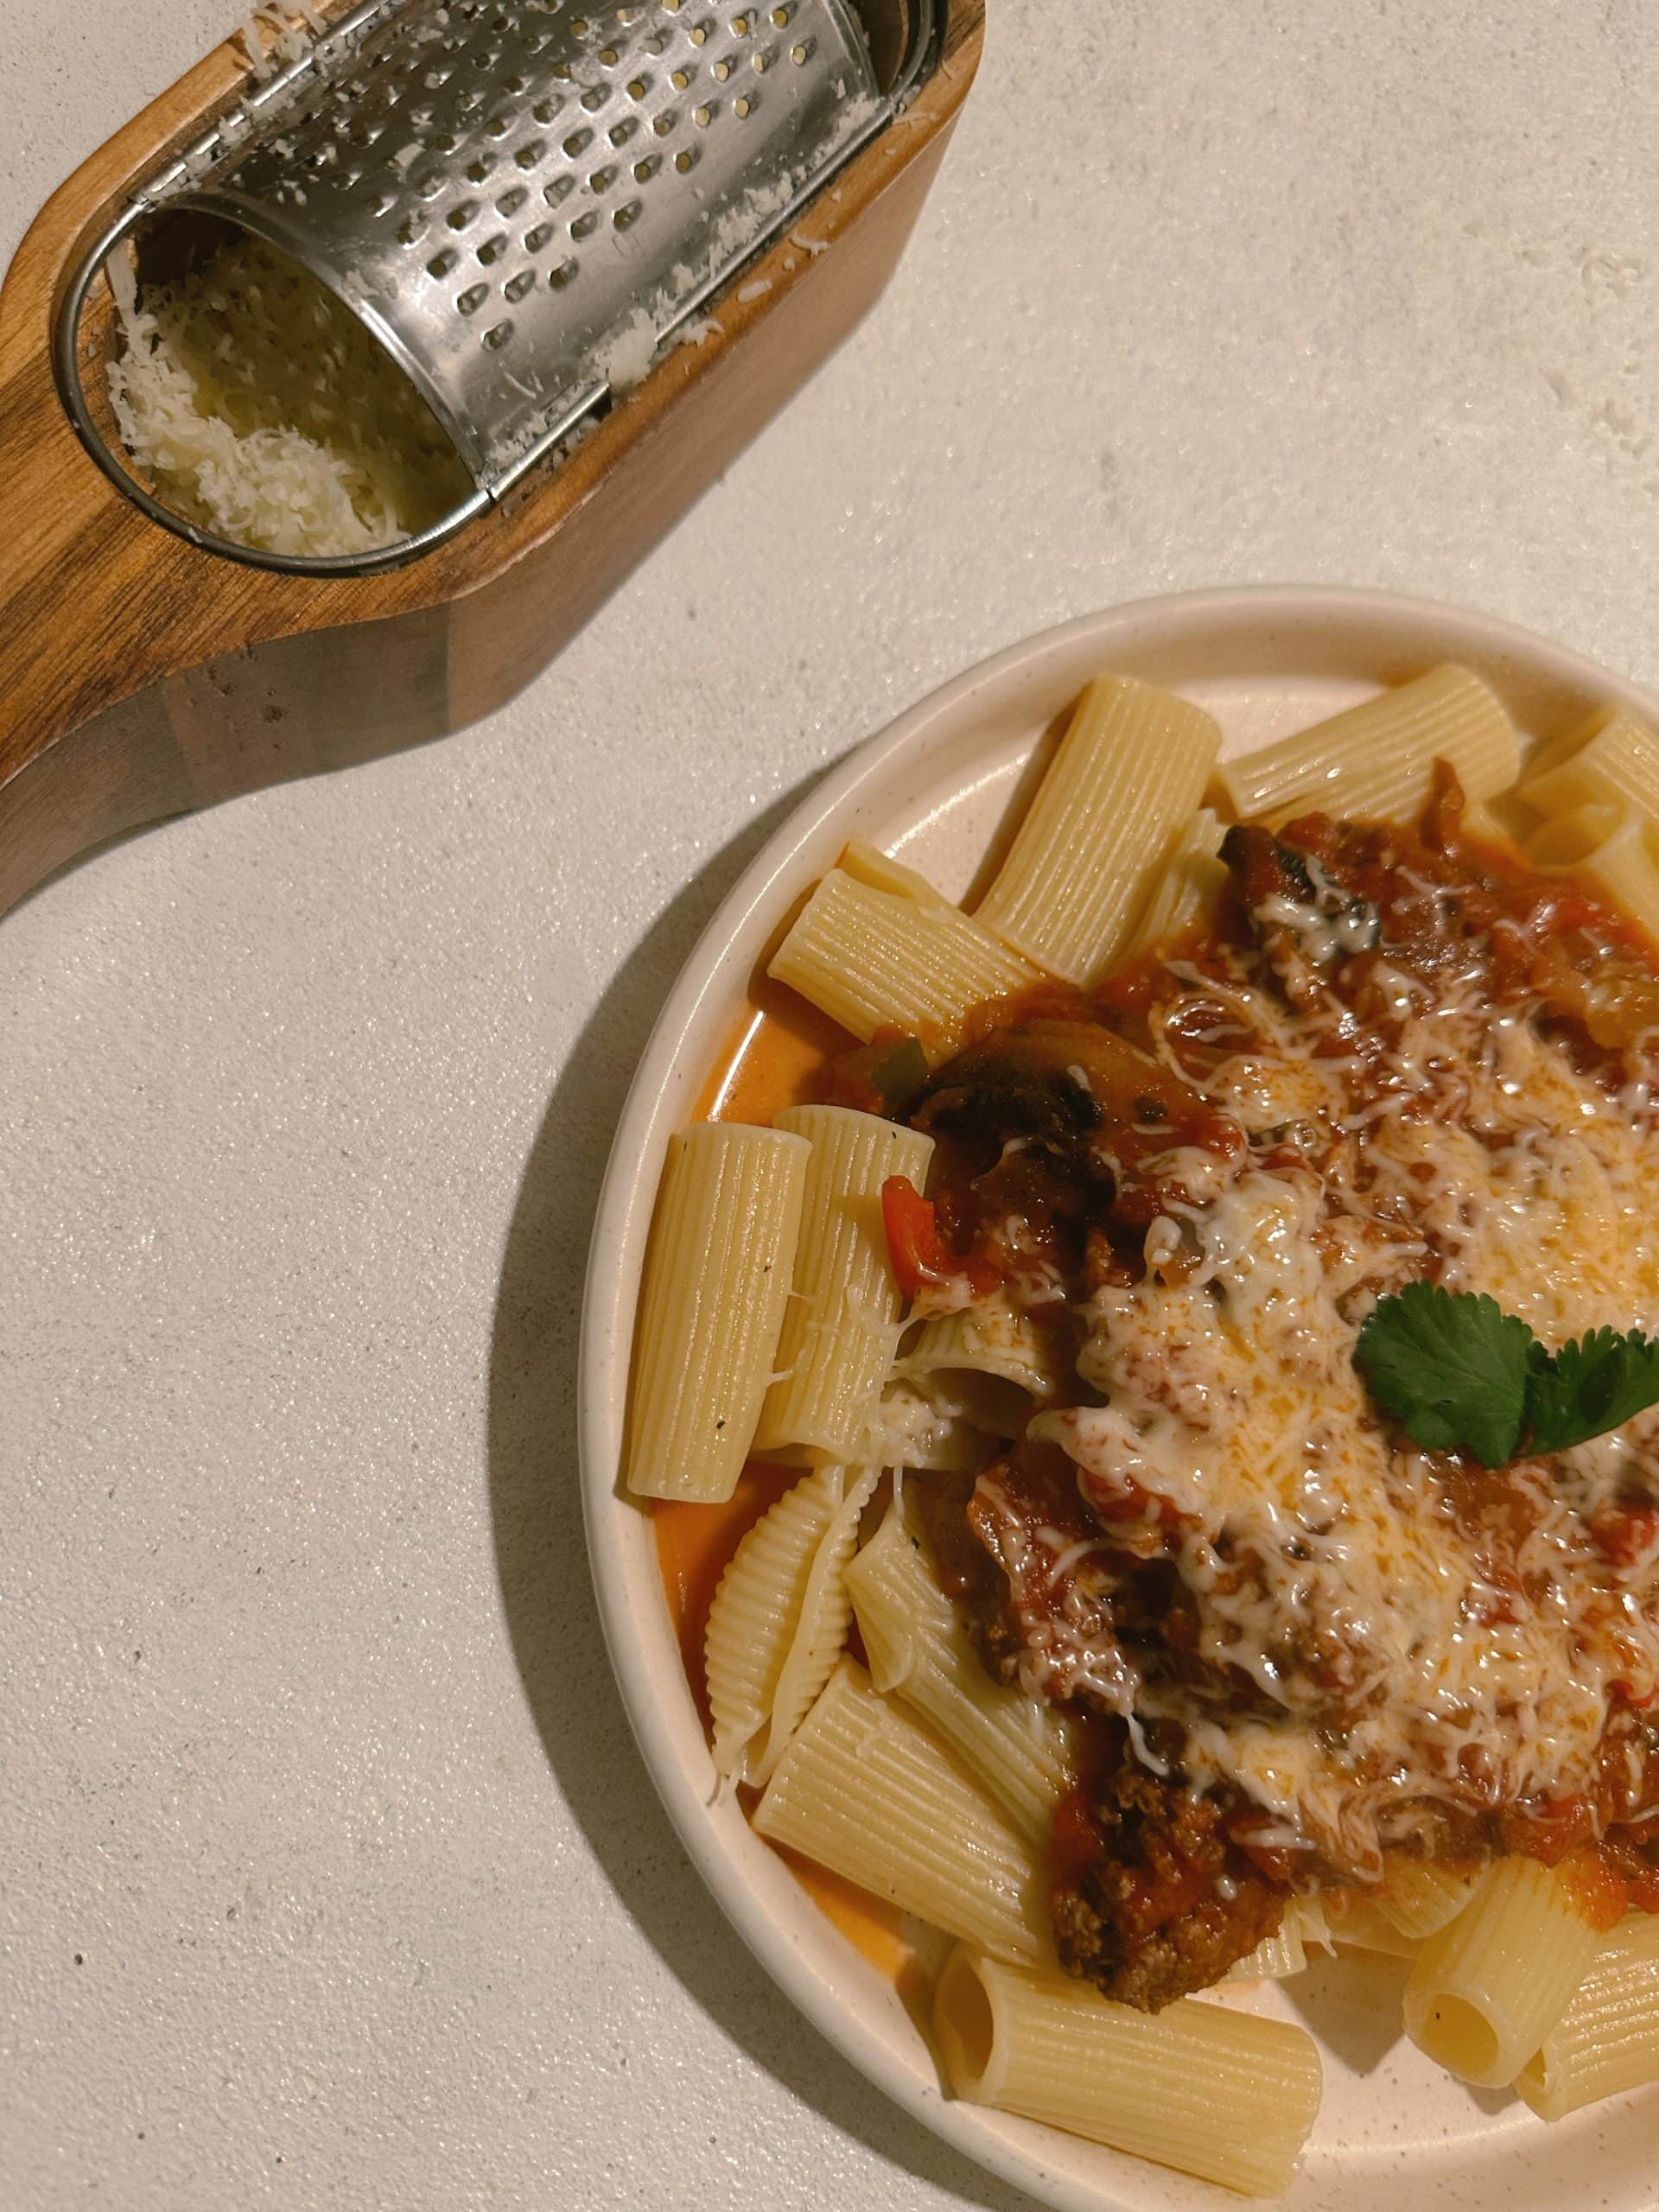 A Culinary Journey: Crafting Homemade Pasta and Meat Sauce with Love